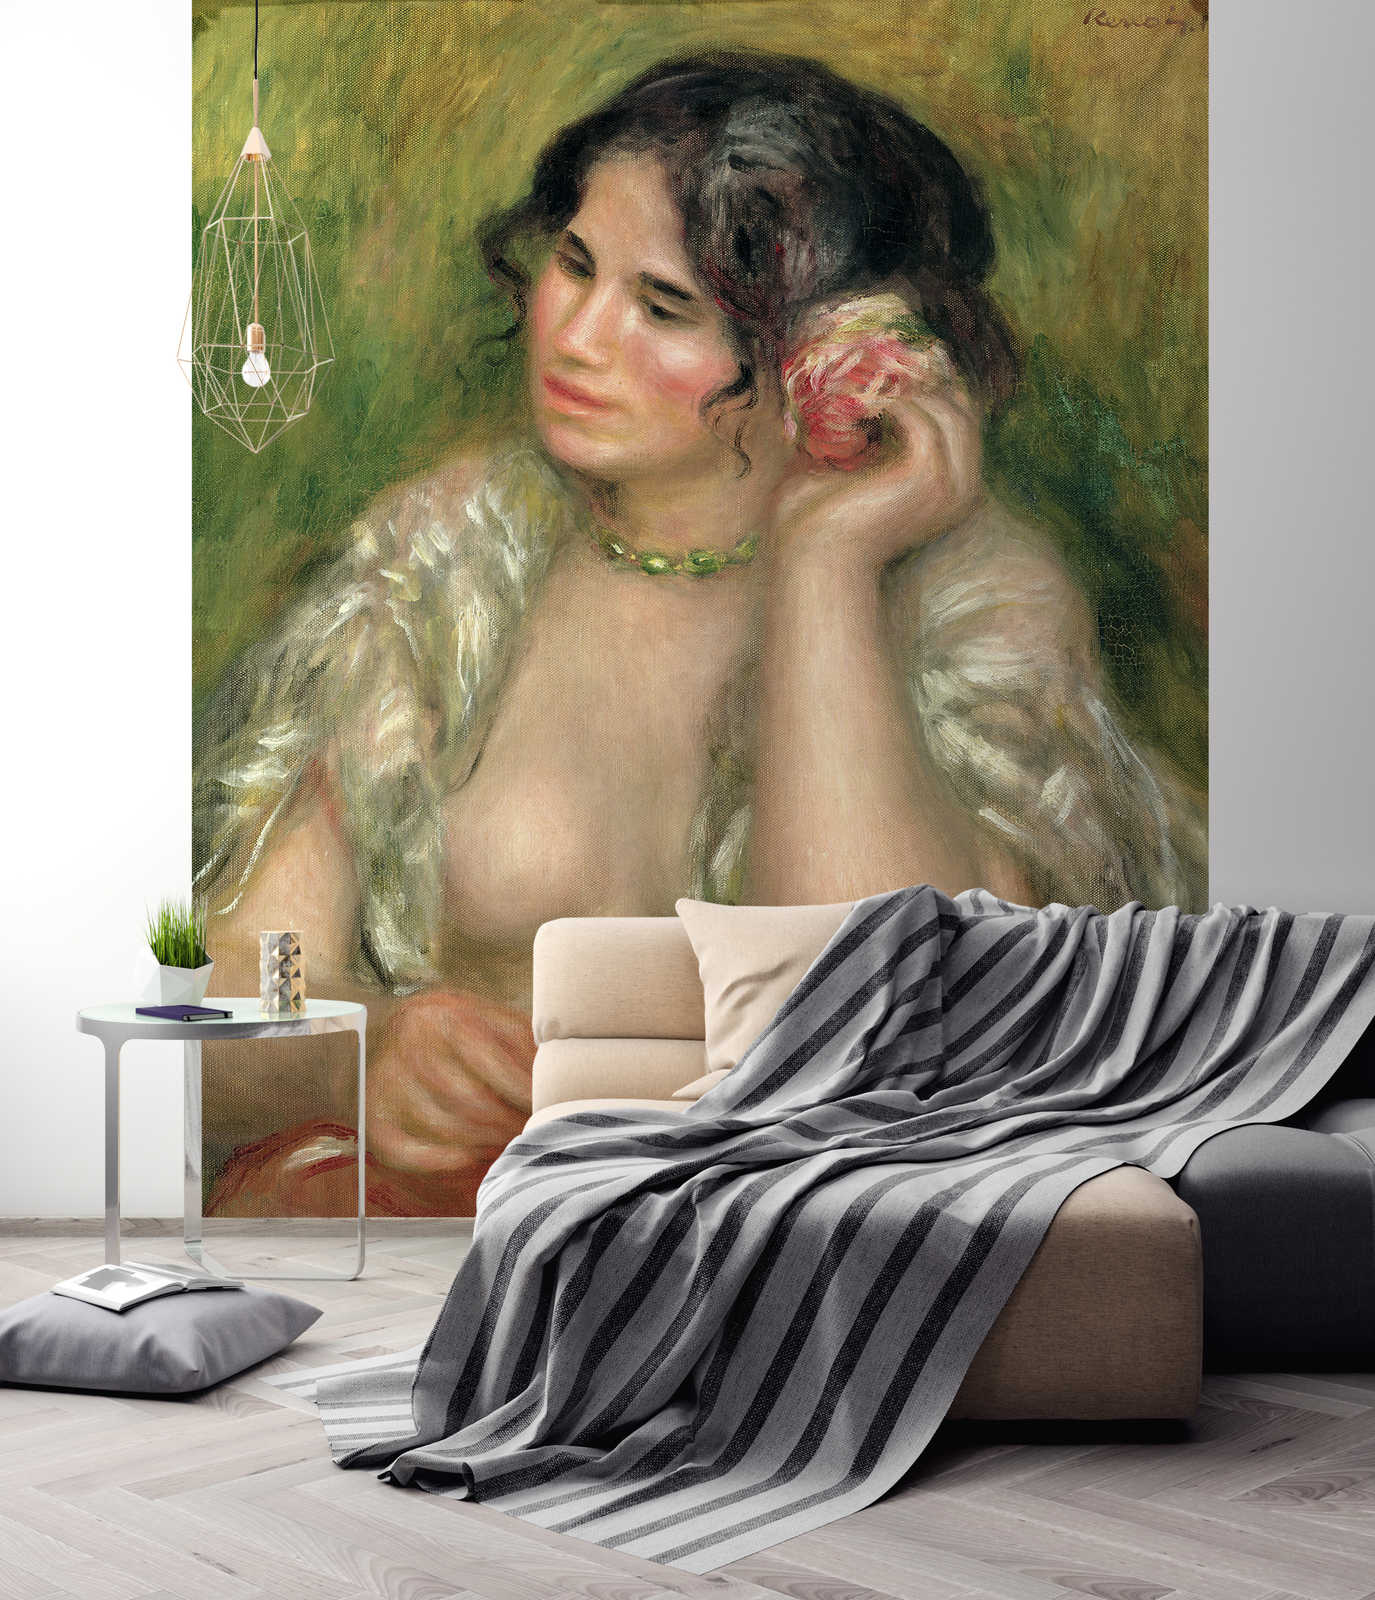             Photo wallpaper "Gabrielle with rose" by Pierre Auguste Renoir
        